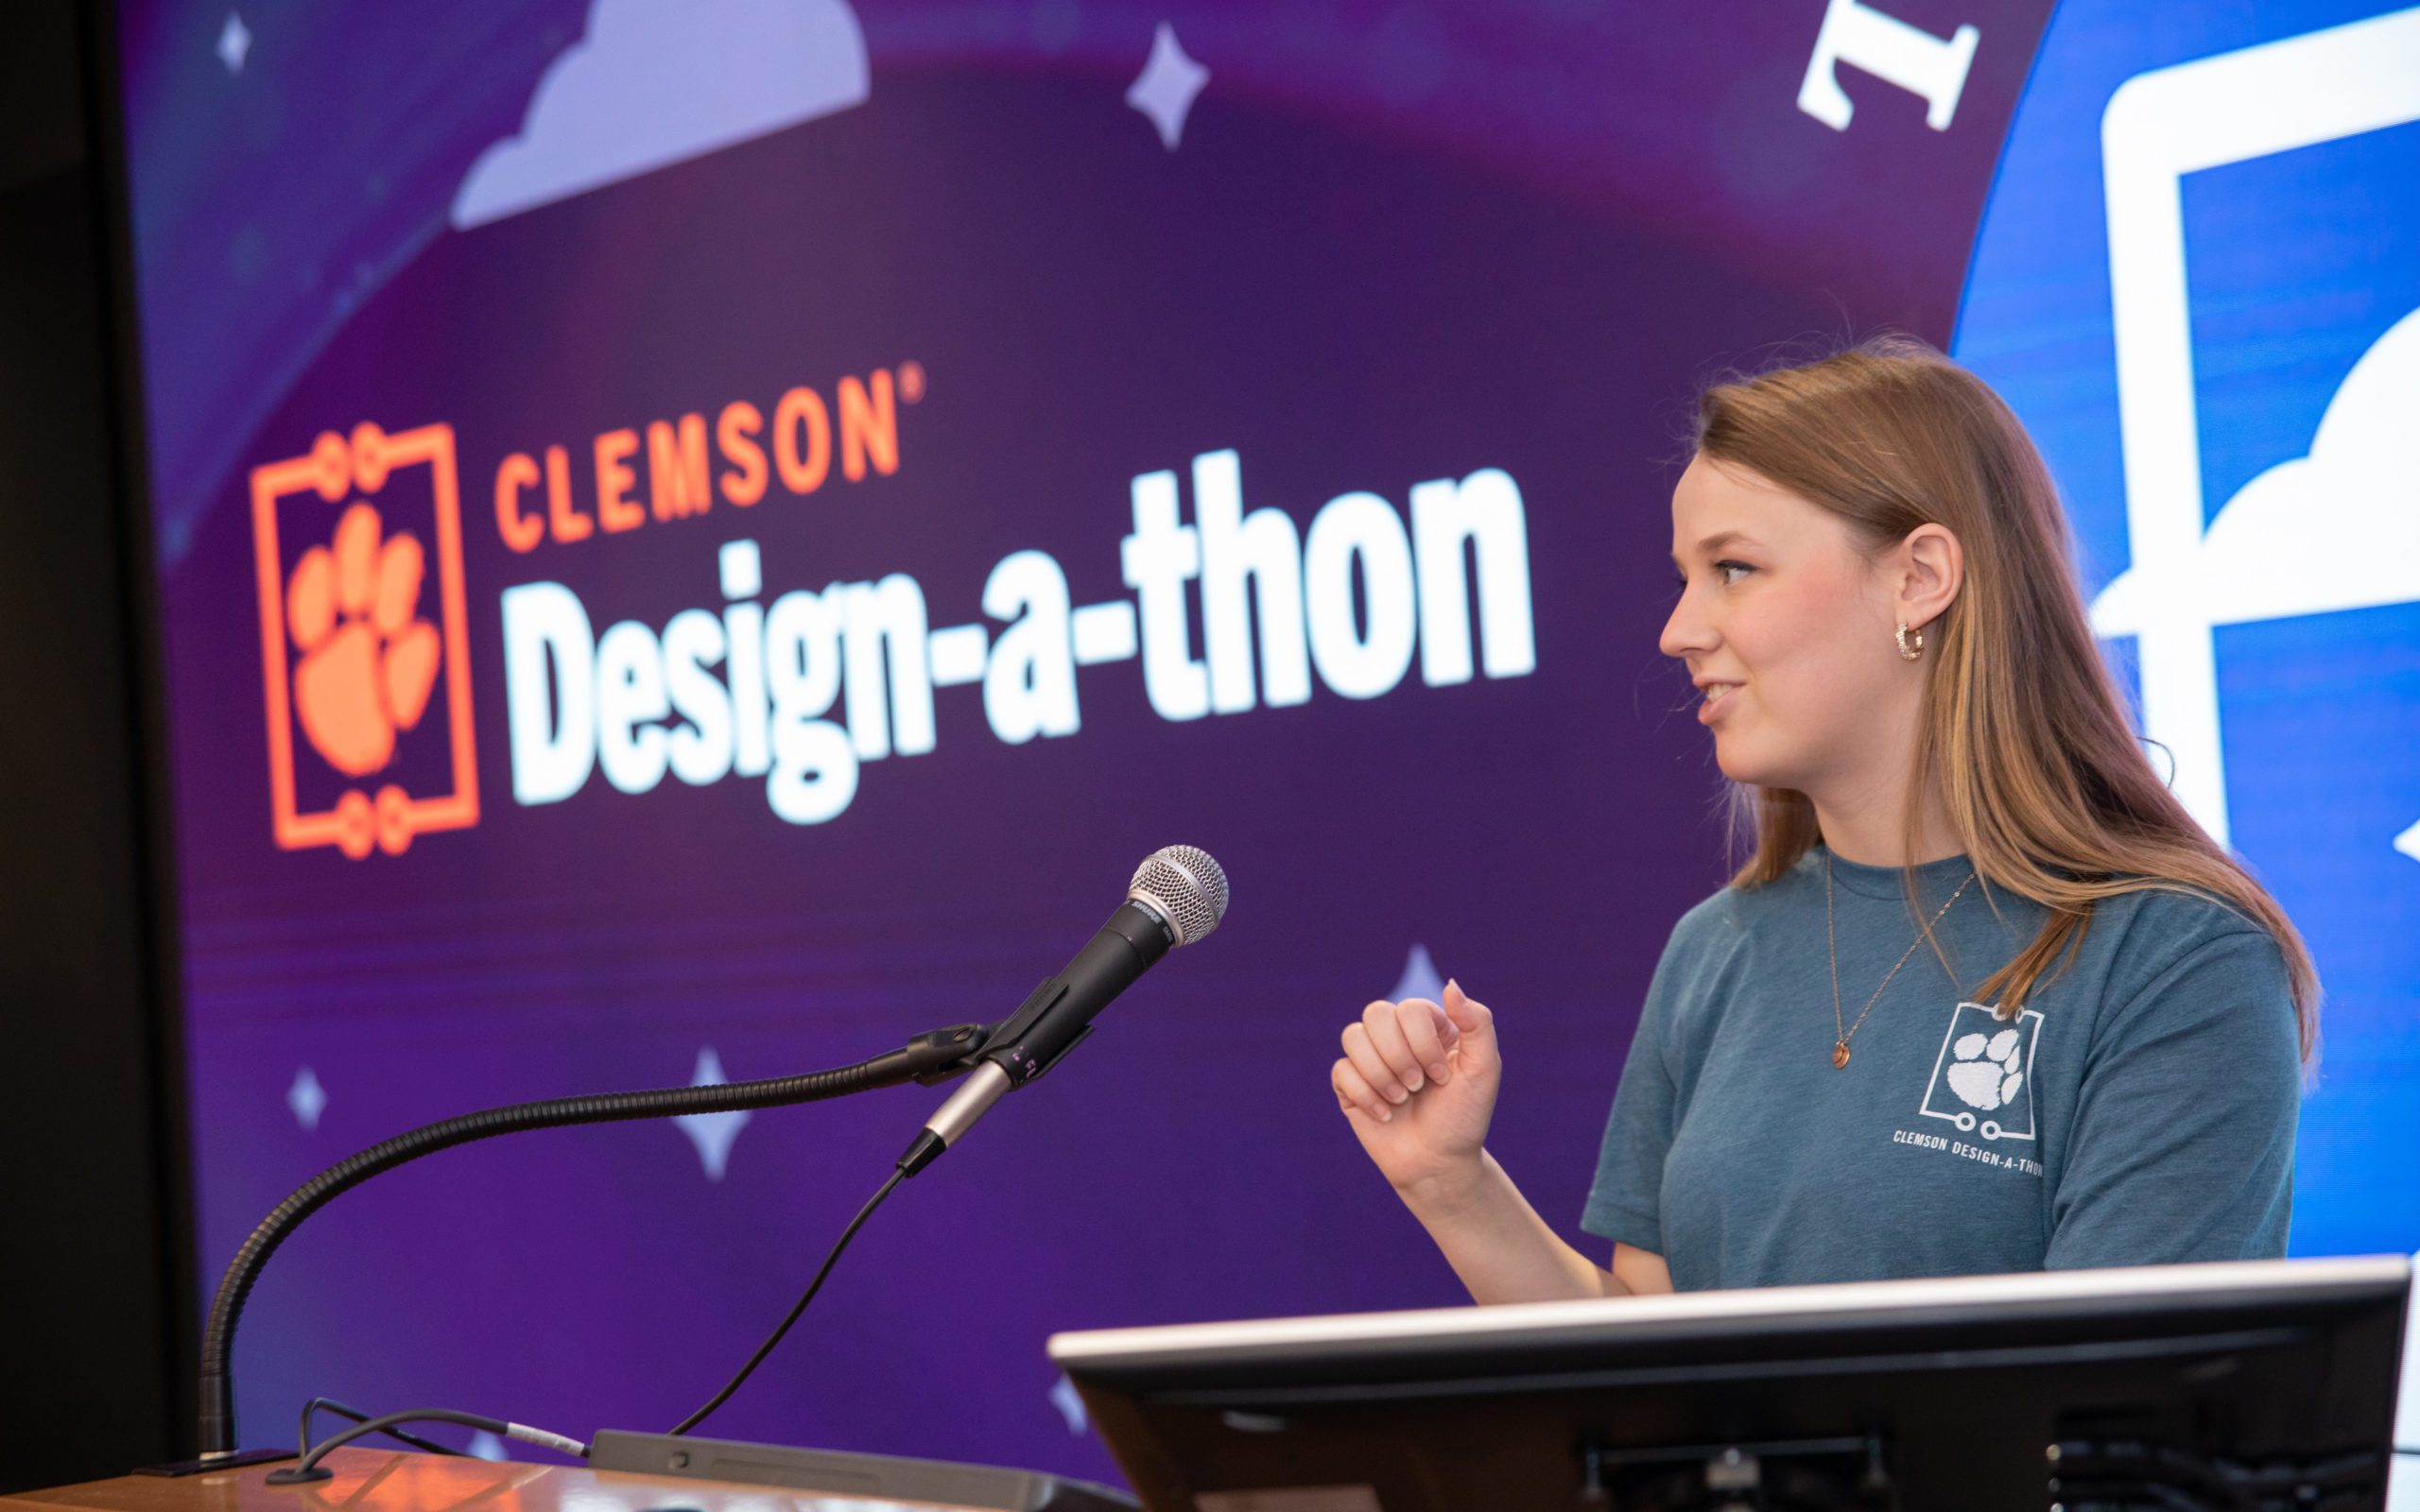 Clemson student at the Design-a-thon at the podium speaking.